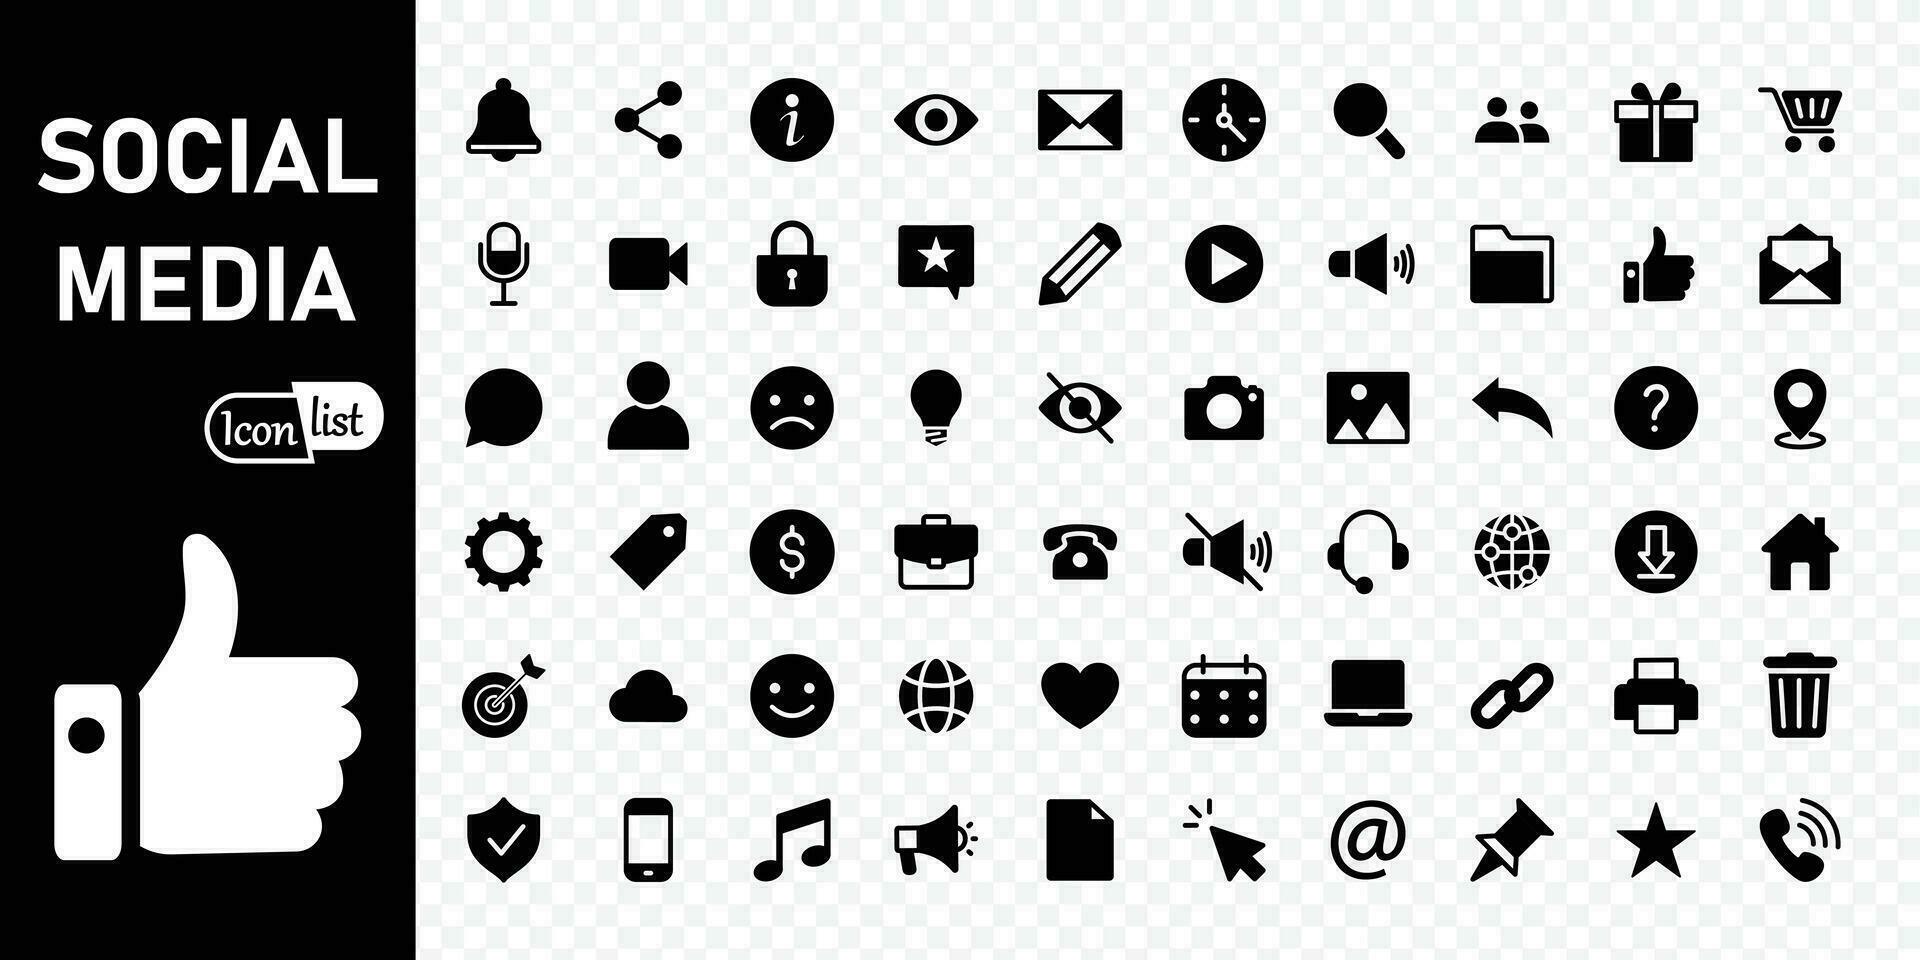 Social Media icon set. Online community, media, website, blog, content, business marketing and social network icons. Solid icon collection. vector